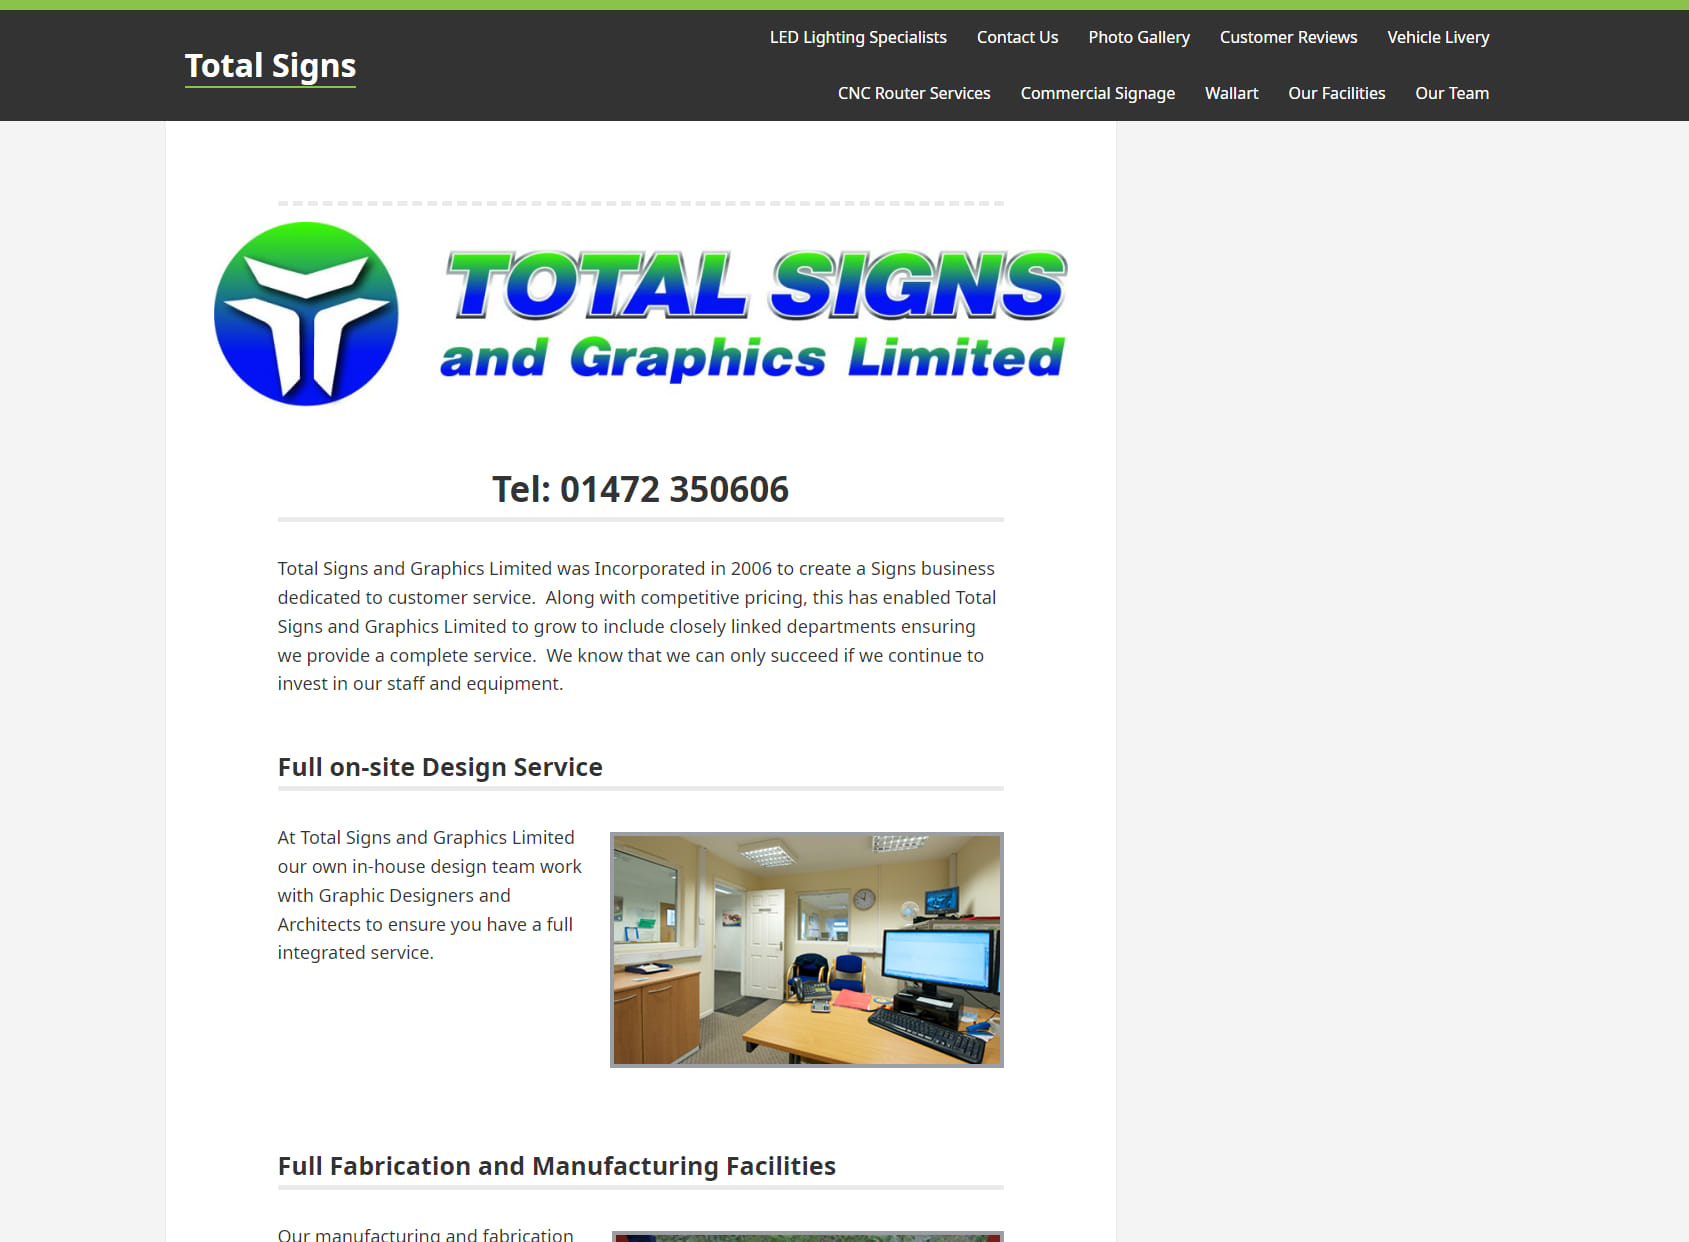 Total Signs and Graphics Limited